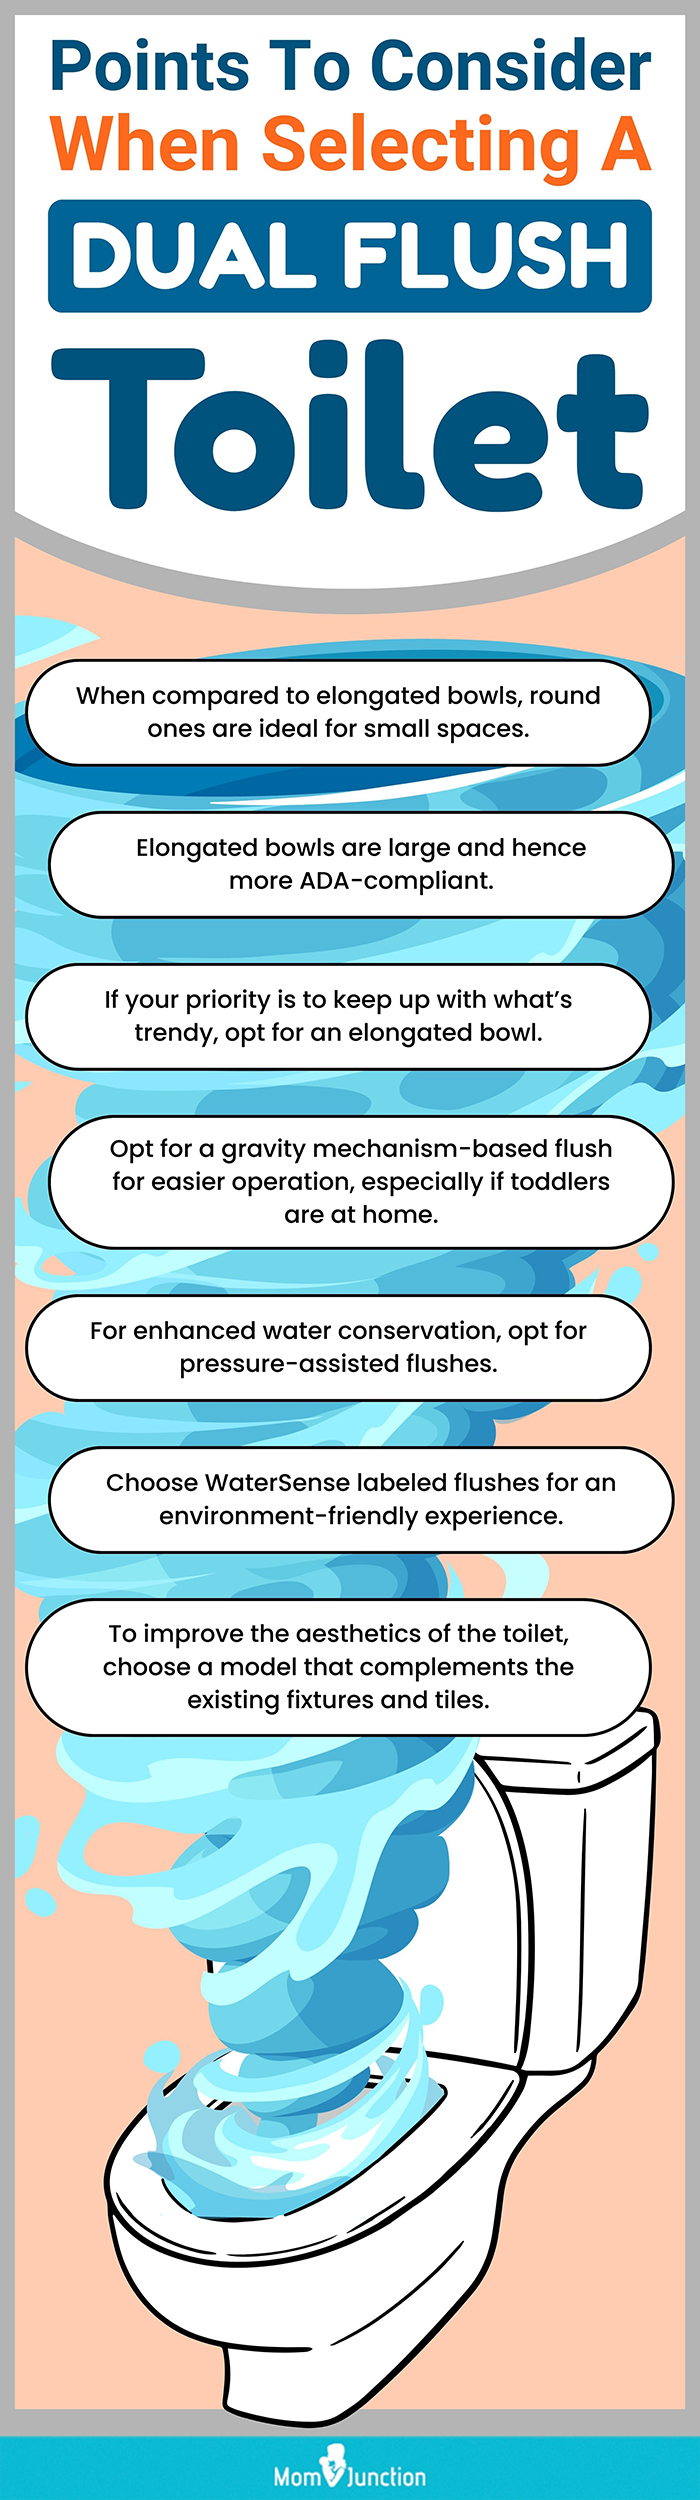 Points To Consider When Selecting A Dual Flush Toilet (infographic)